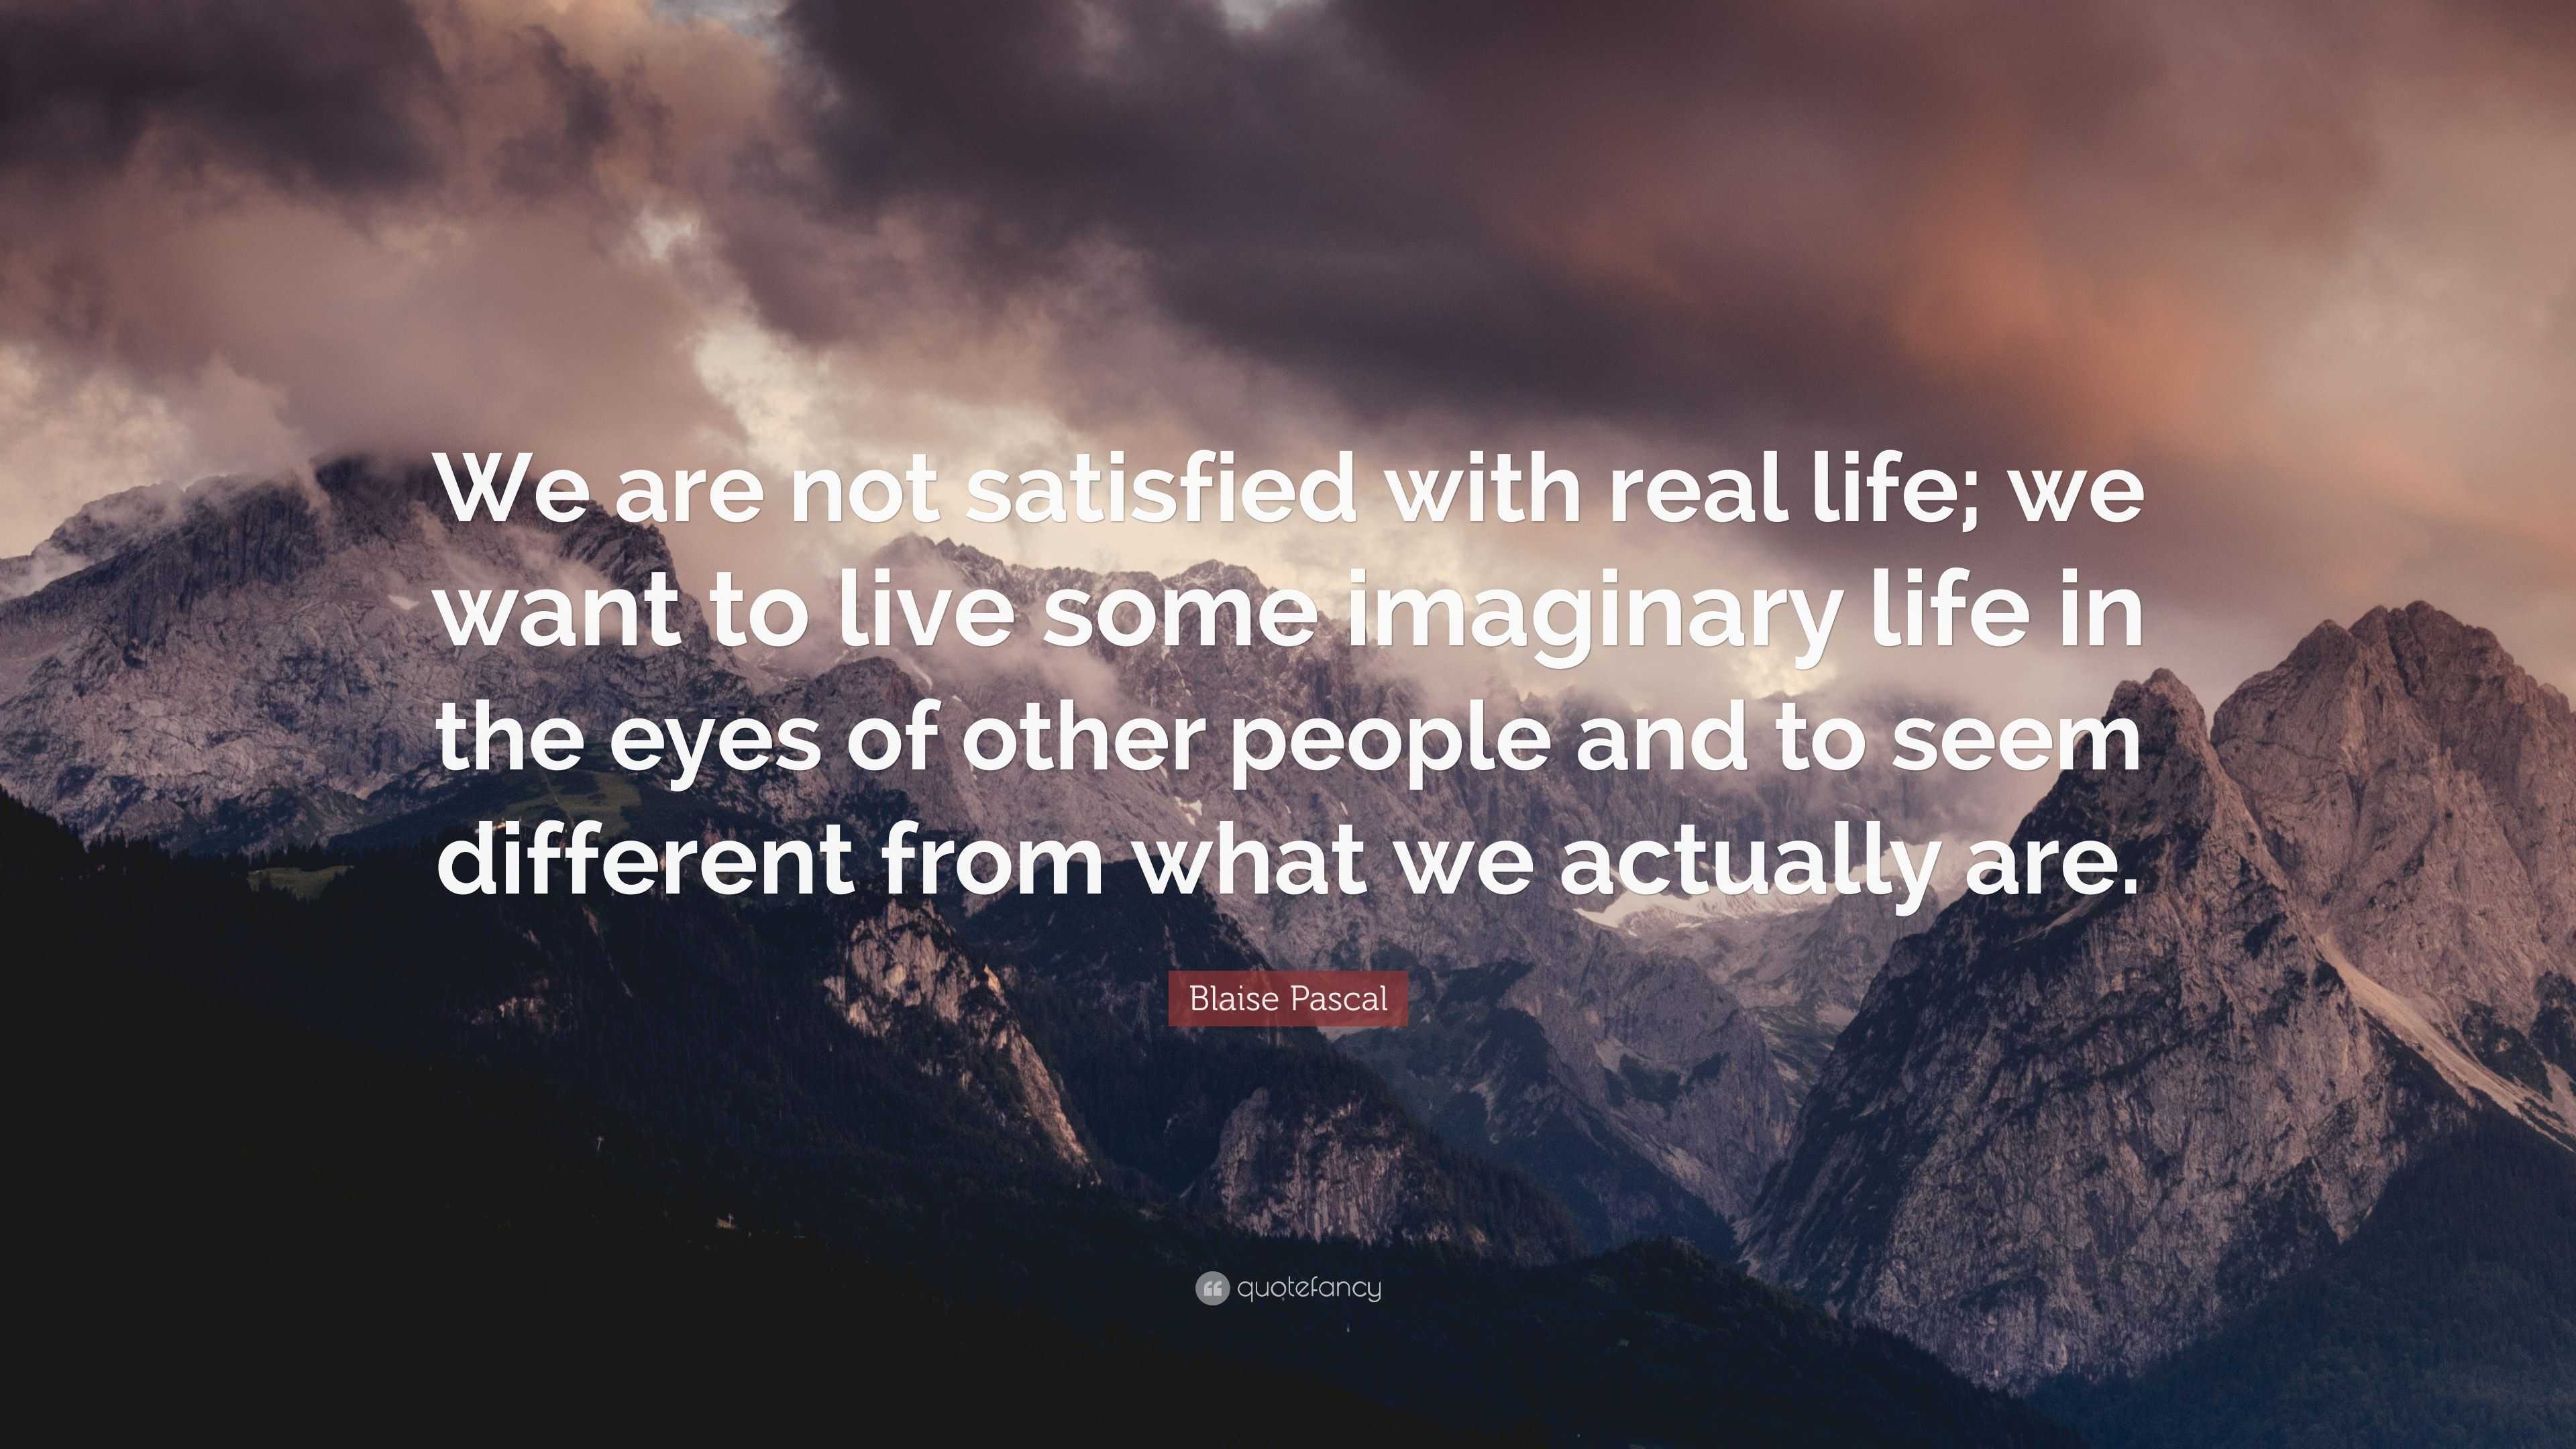 Blaise Pascal Quote “We are not satisfied with real life we want to